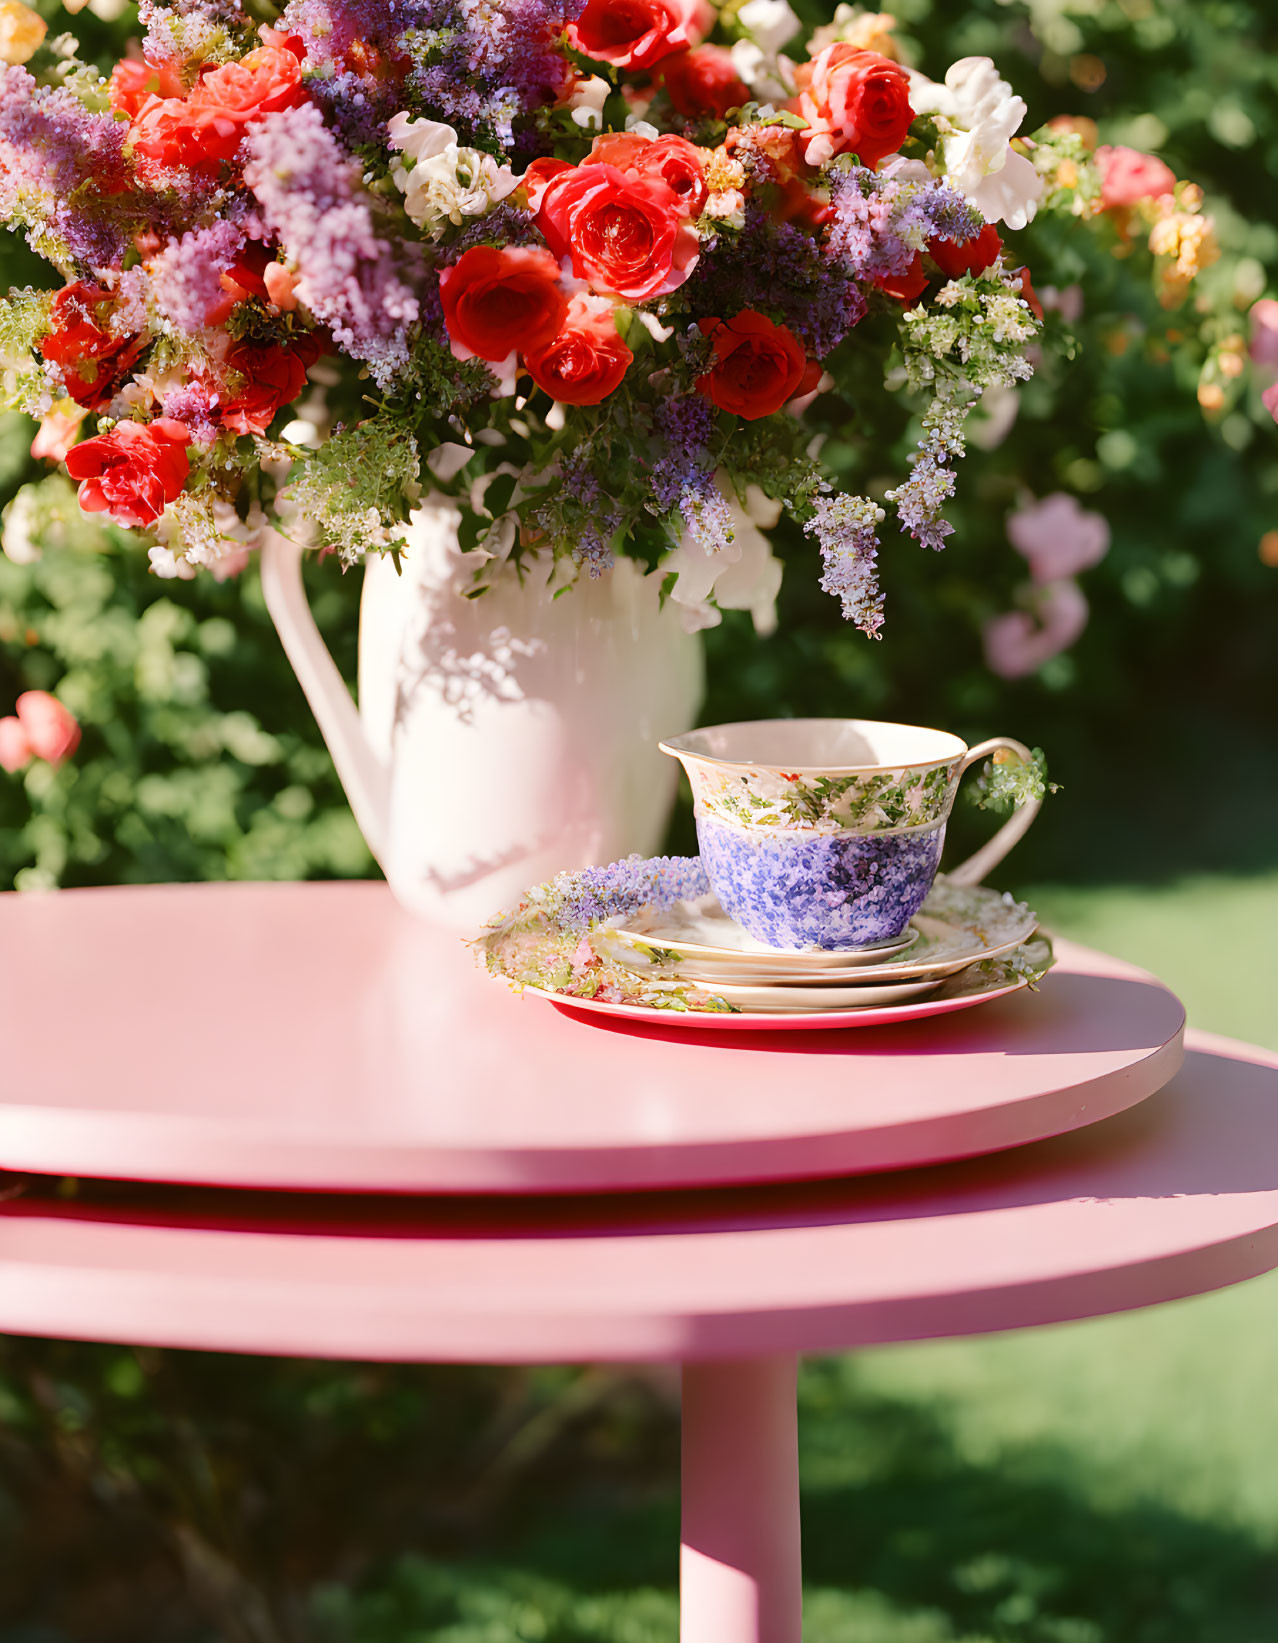 Vintage teacup set on pink table with colorful flower bouquet - elegant garden tea party setting